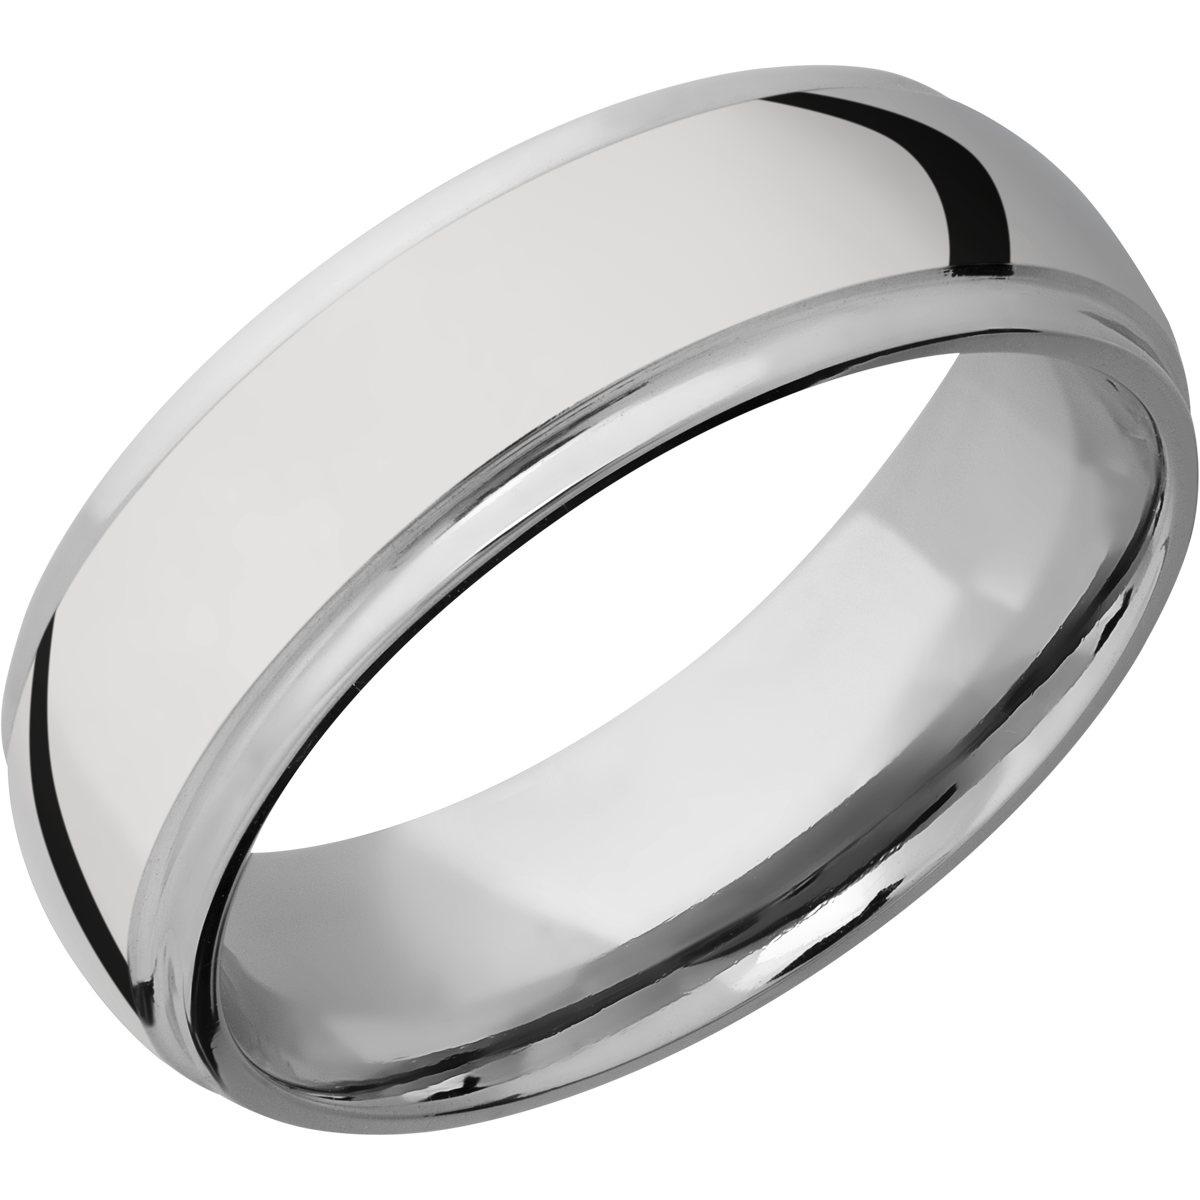 Wedding Bands Classic Bands Domed Bands w/Edge Cobalt Satin 7mm Rounded Edge Band Size 11 